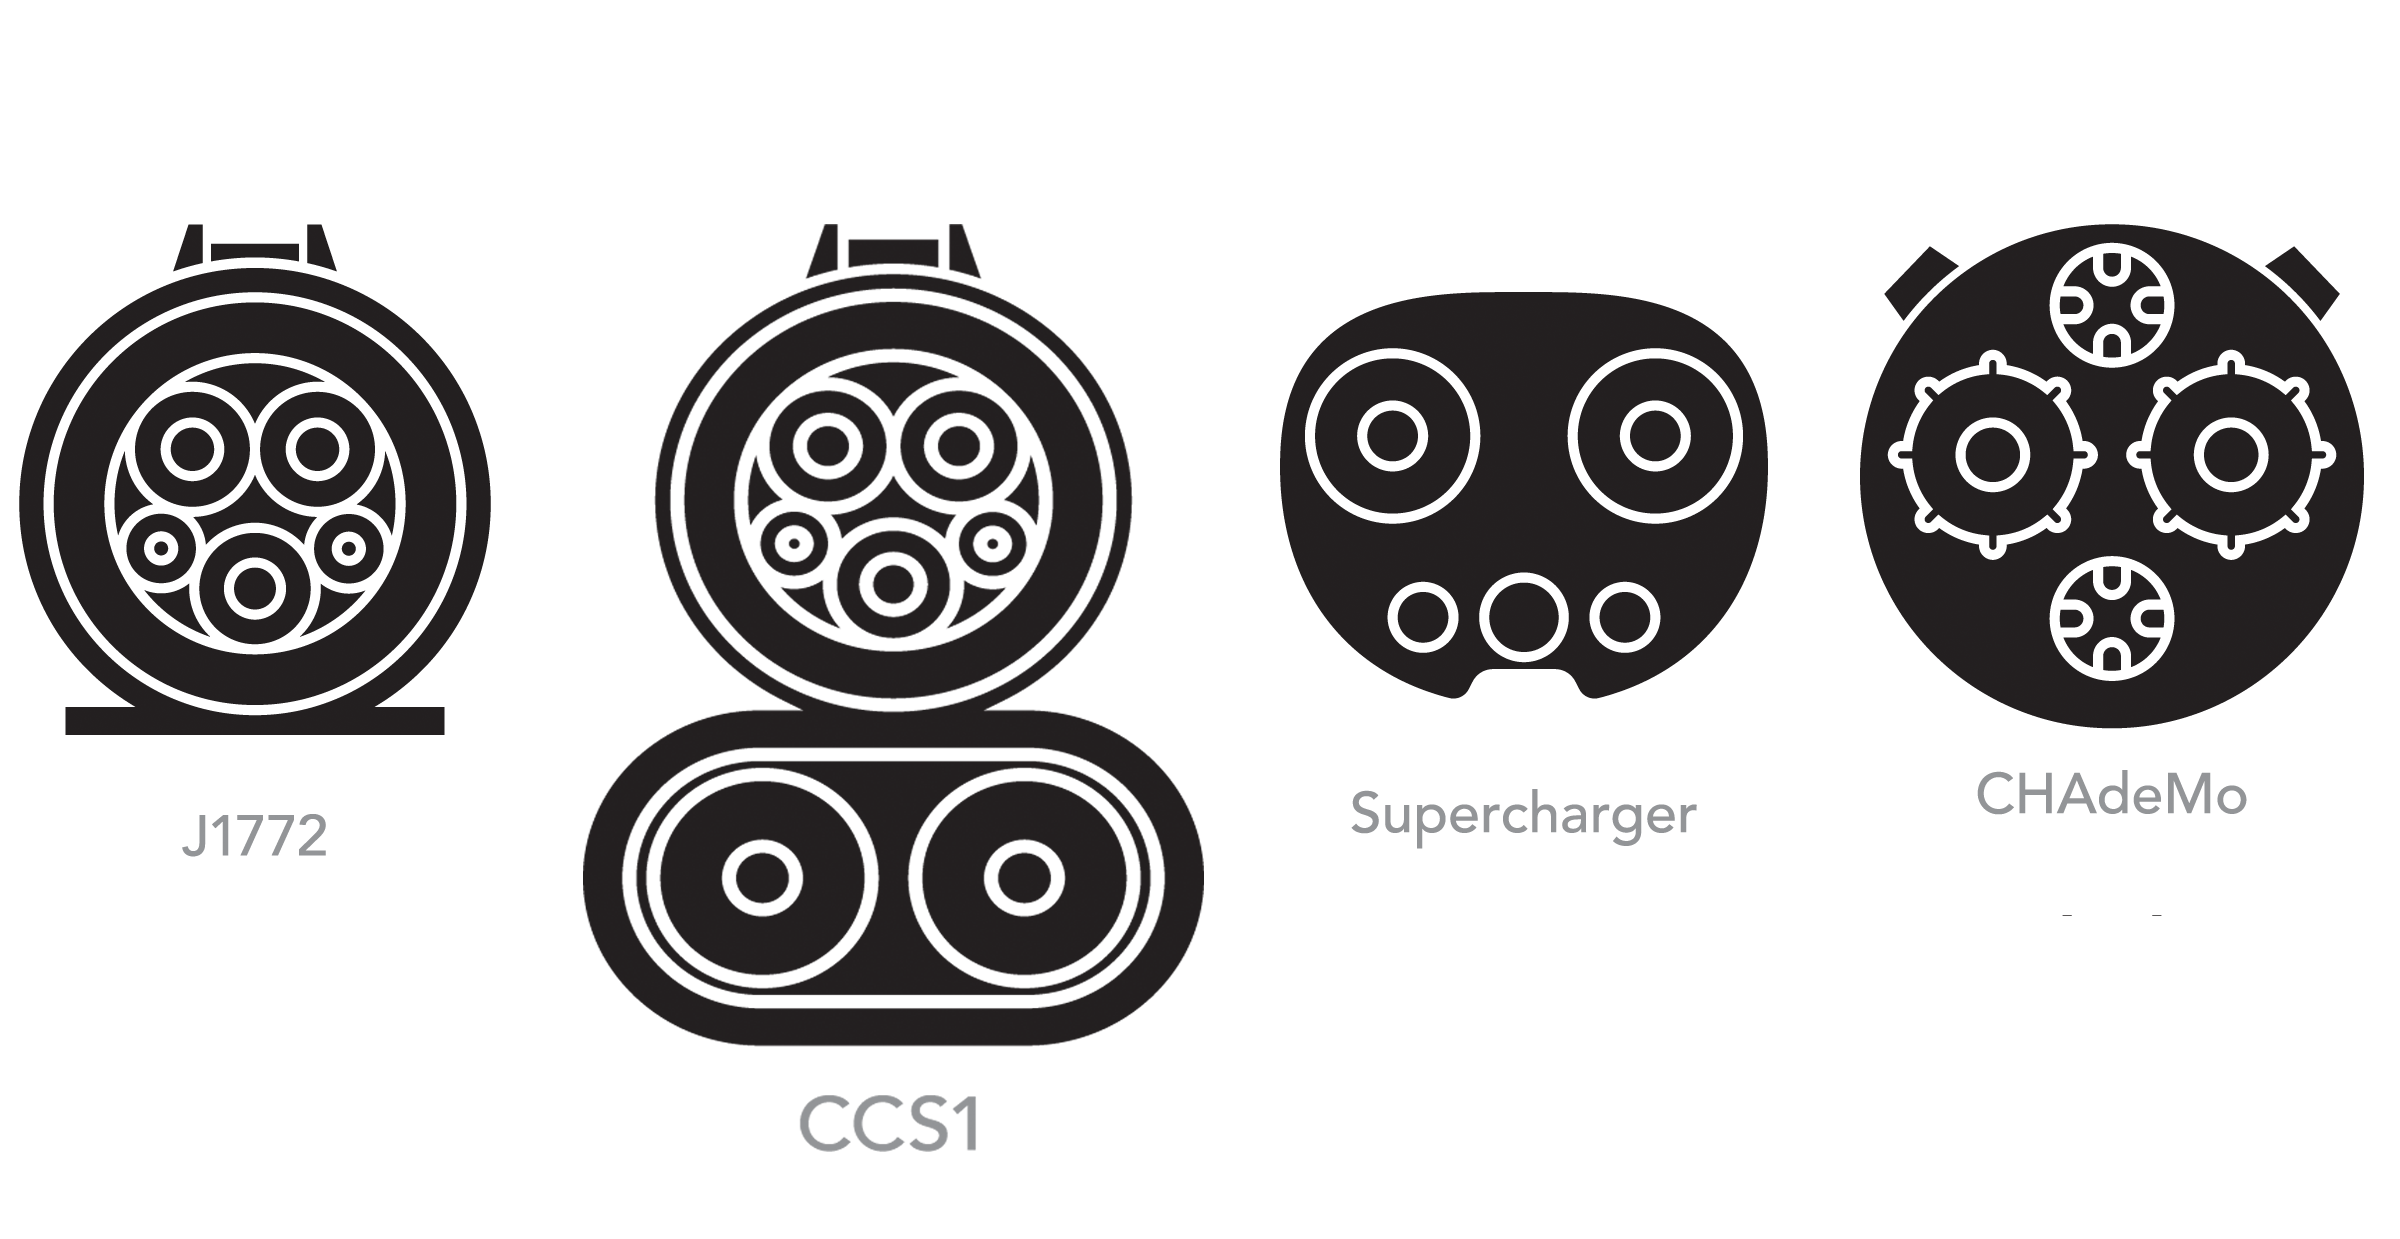 https://cdn.arstechnica.net/wp-content/uploads/2022/07/charging-plugs-illusttration-1.png